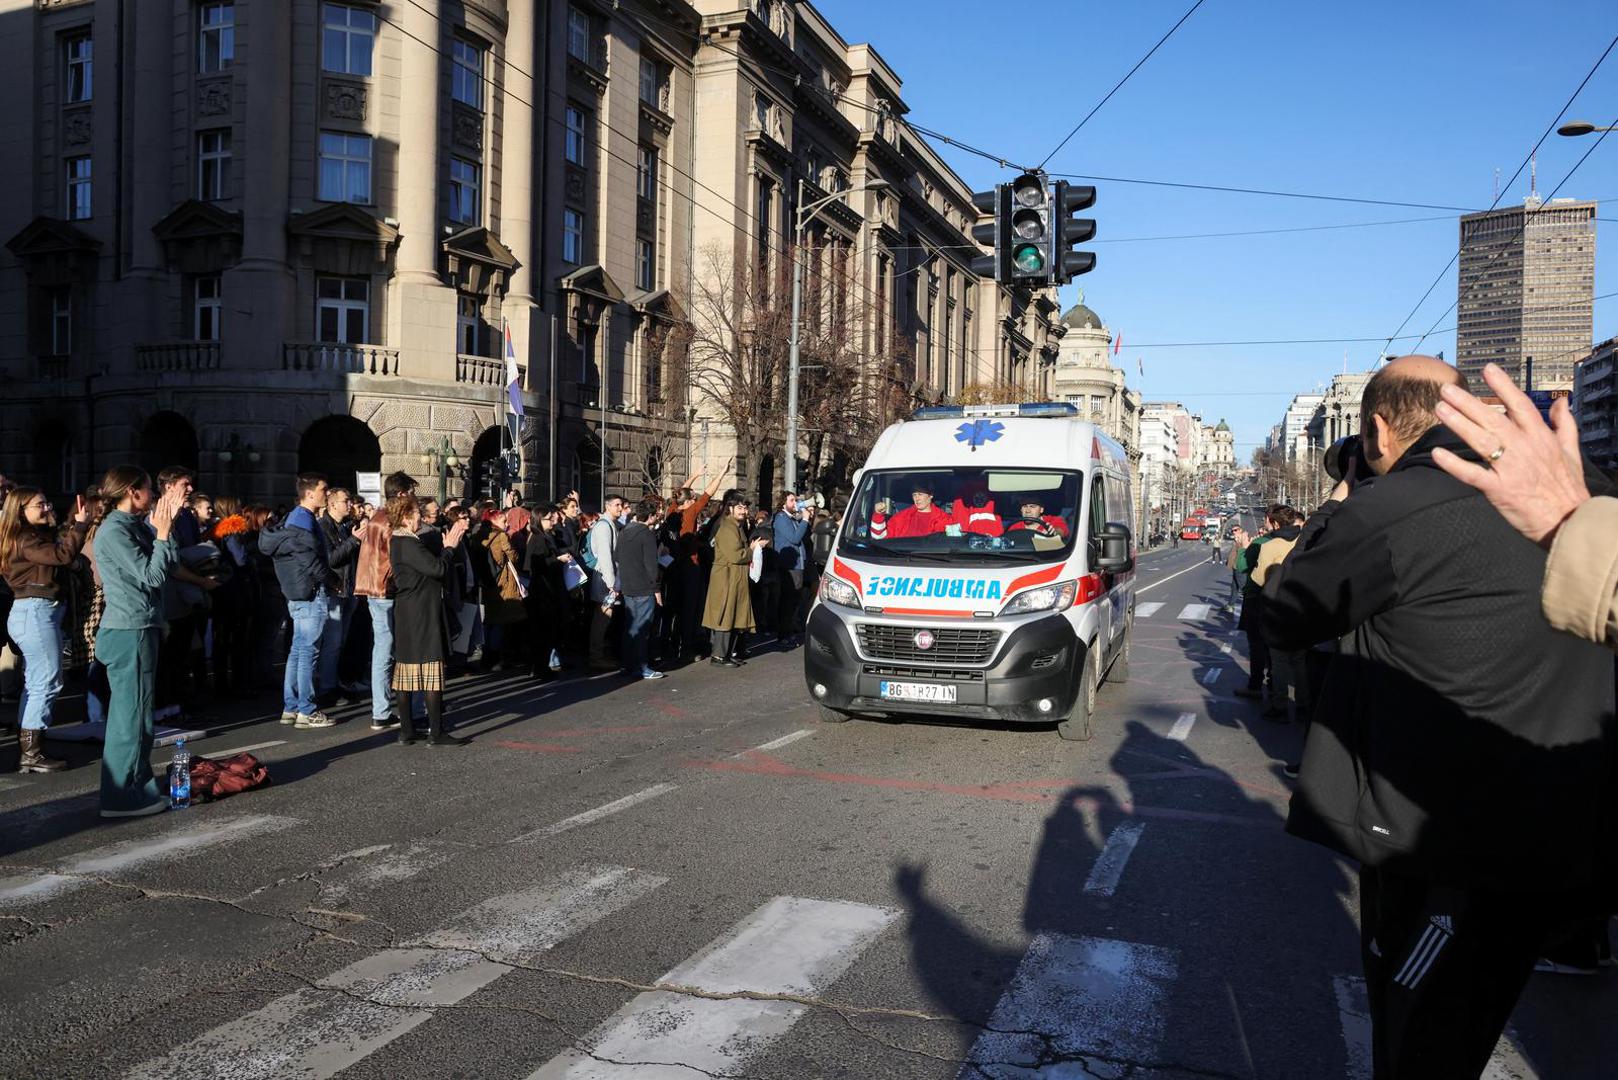 People let an ambulance pass, during a protest against alleged major election law violations in the Belgrade city and parliament races, in Belgrade, Serbia, December 25, 2023. REUTERS/Zorana Jevtic Photo: ZORANA JEVTIC/REUTERS